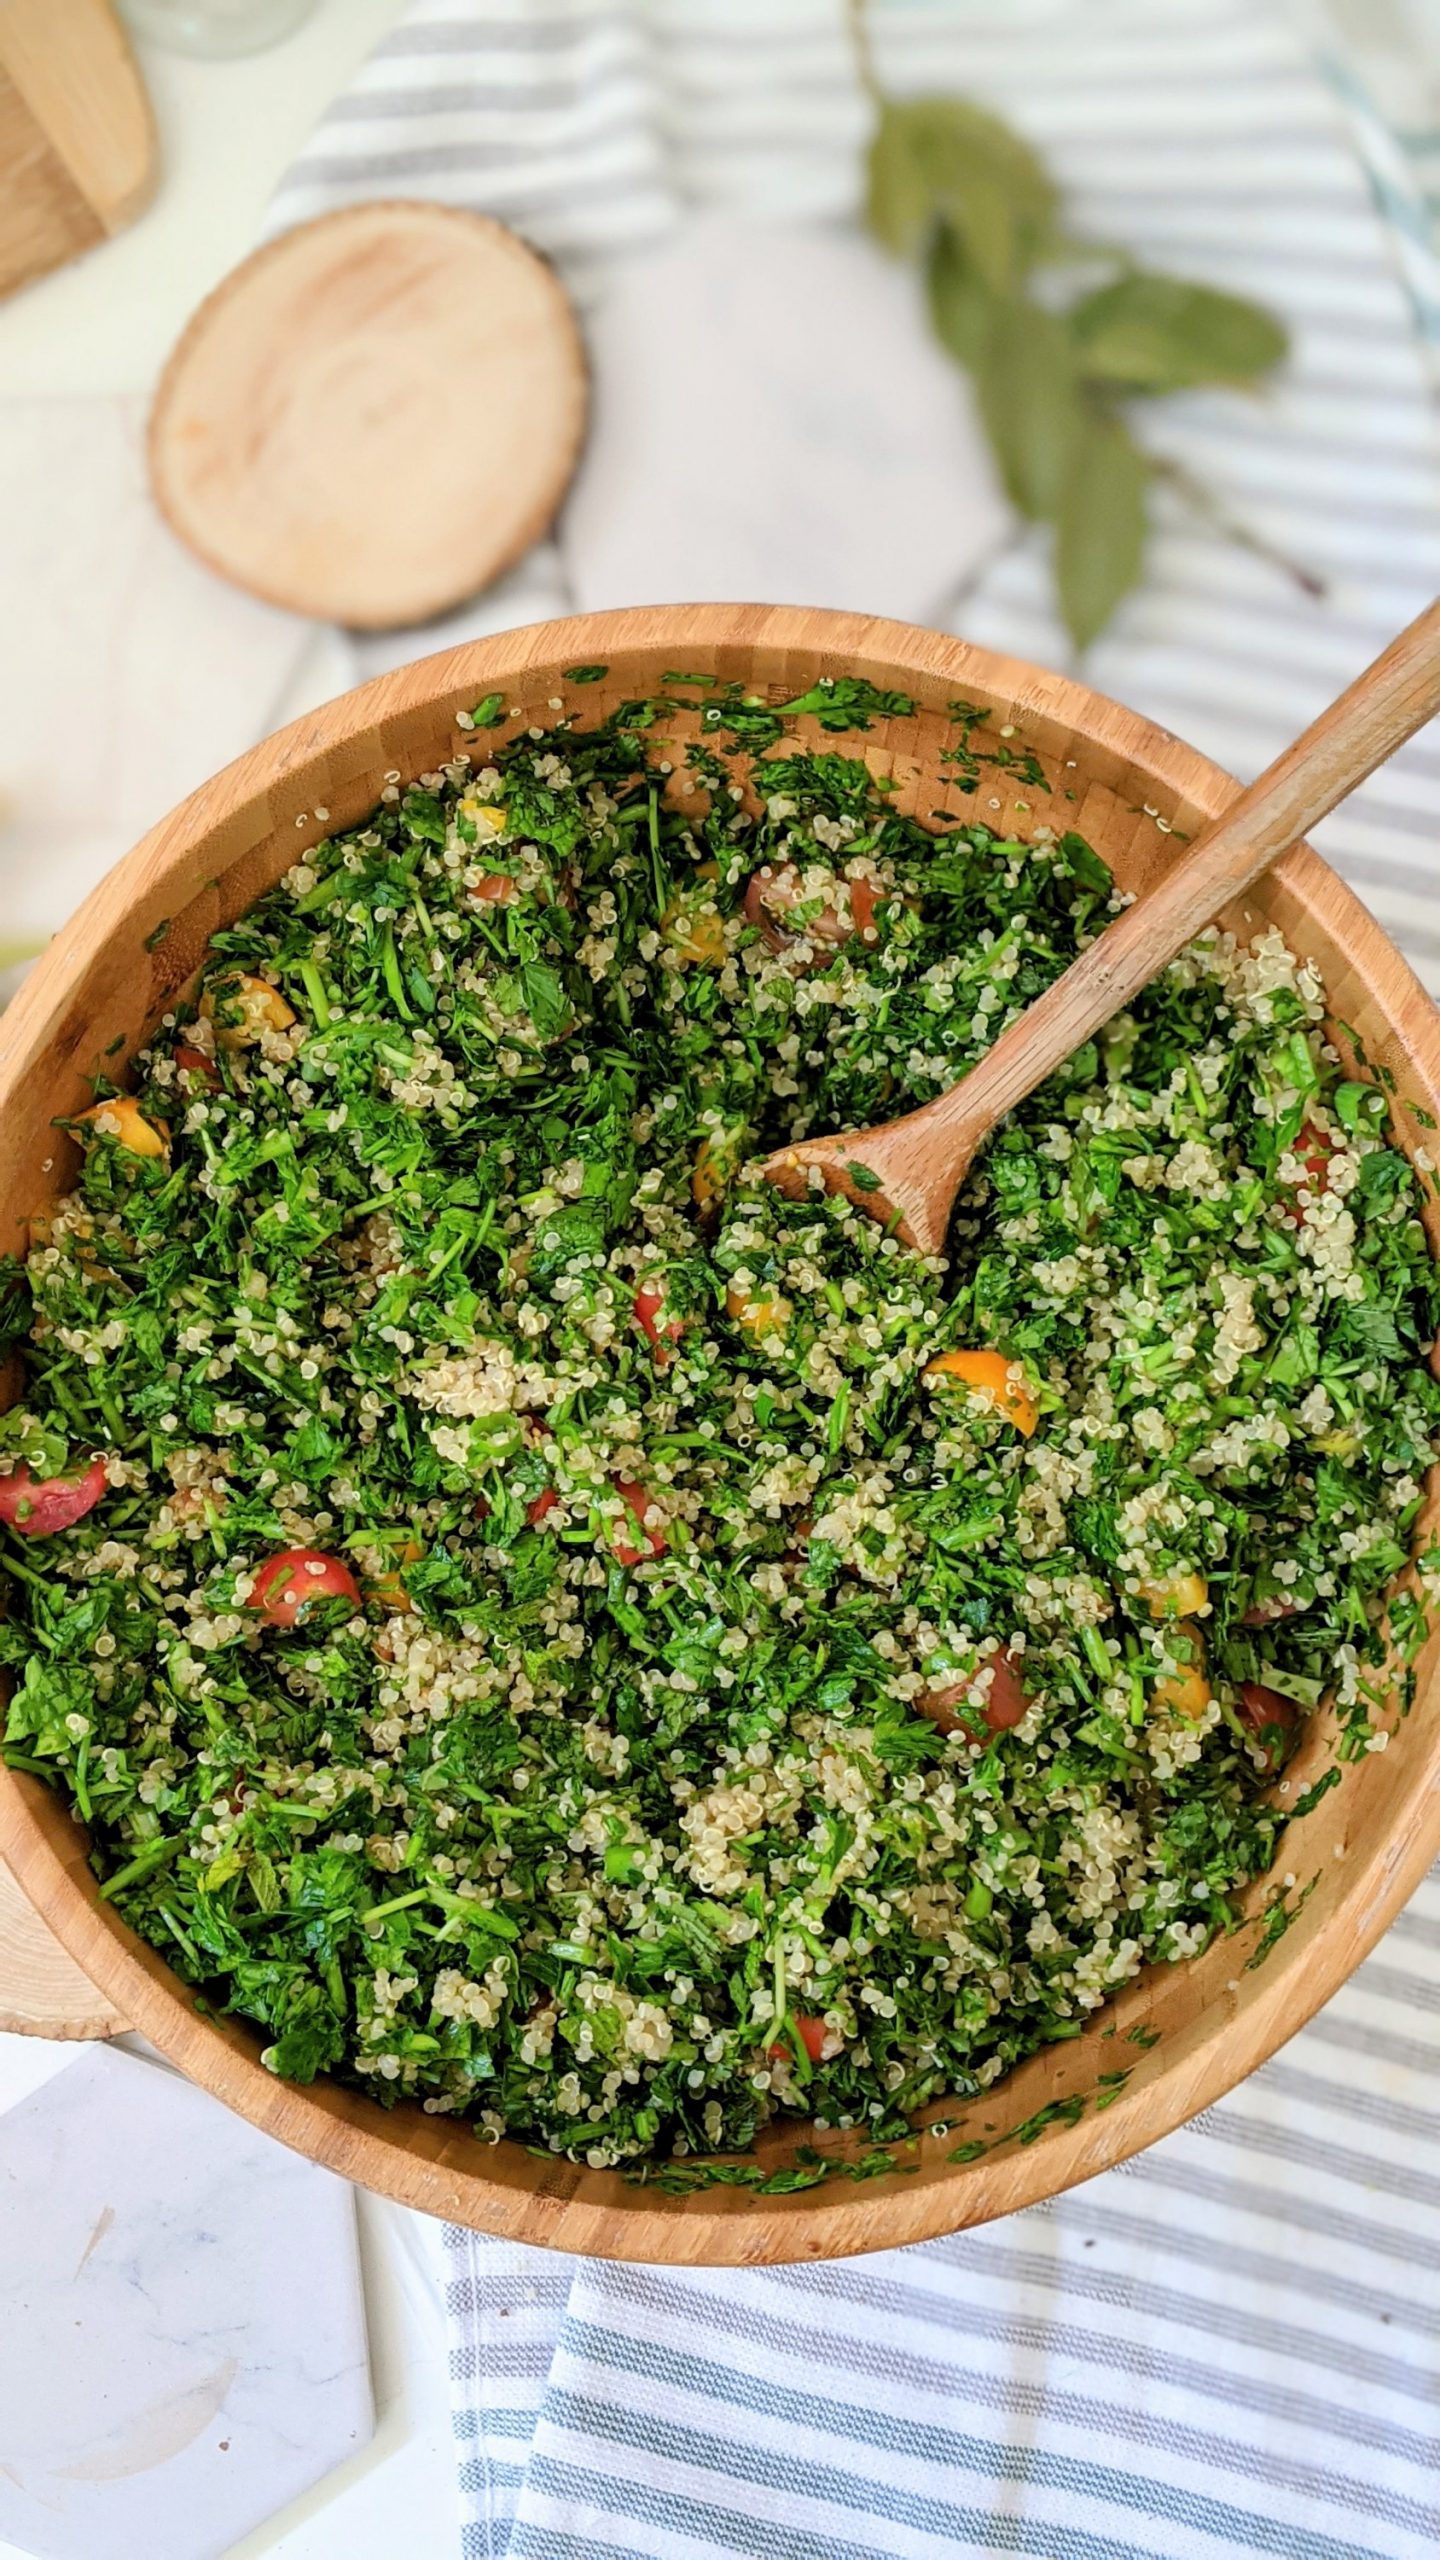 tabouli salad with quinoa mint parsley salad recipe gluten free tabbouli without bulger wheat white quinoa parsley salad with tomatoes and lemon vinaigrette olive oil mint dressing